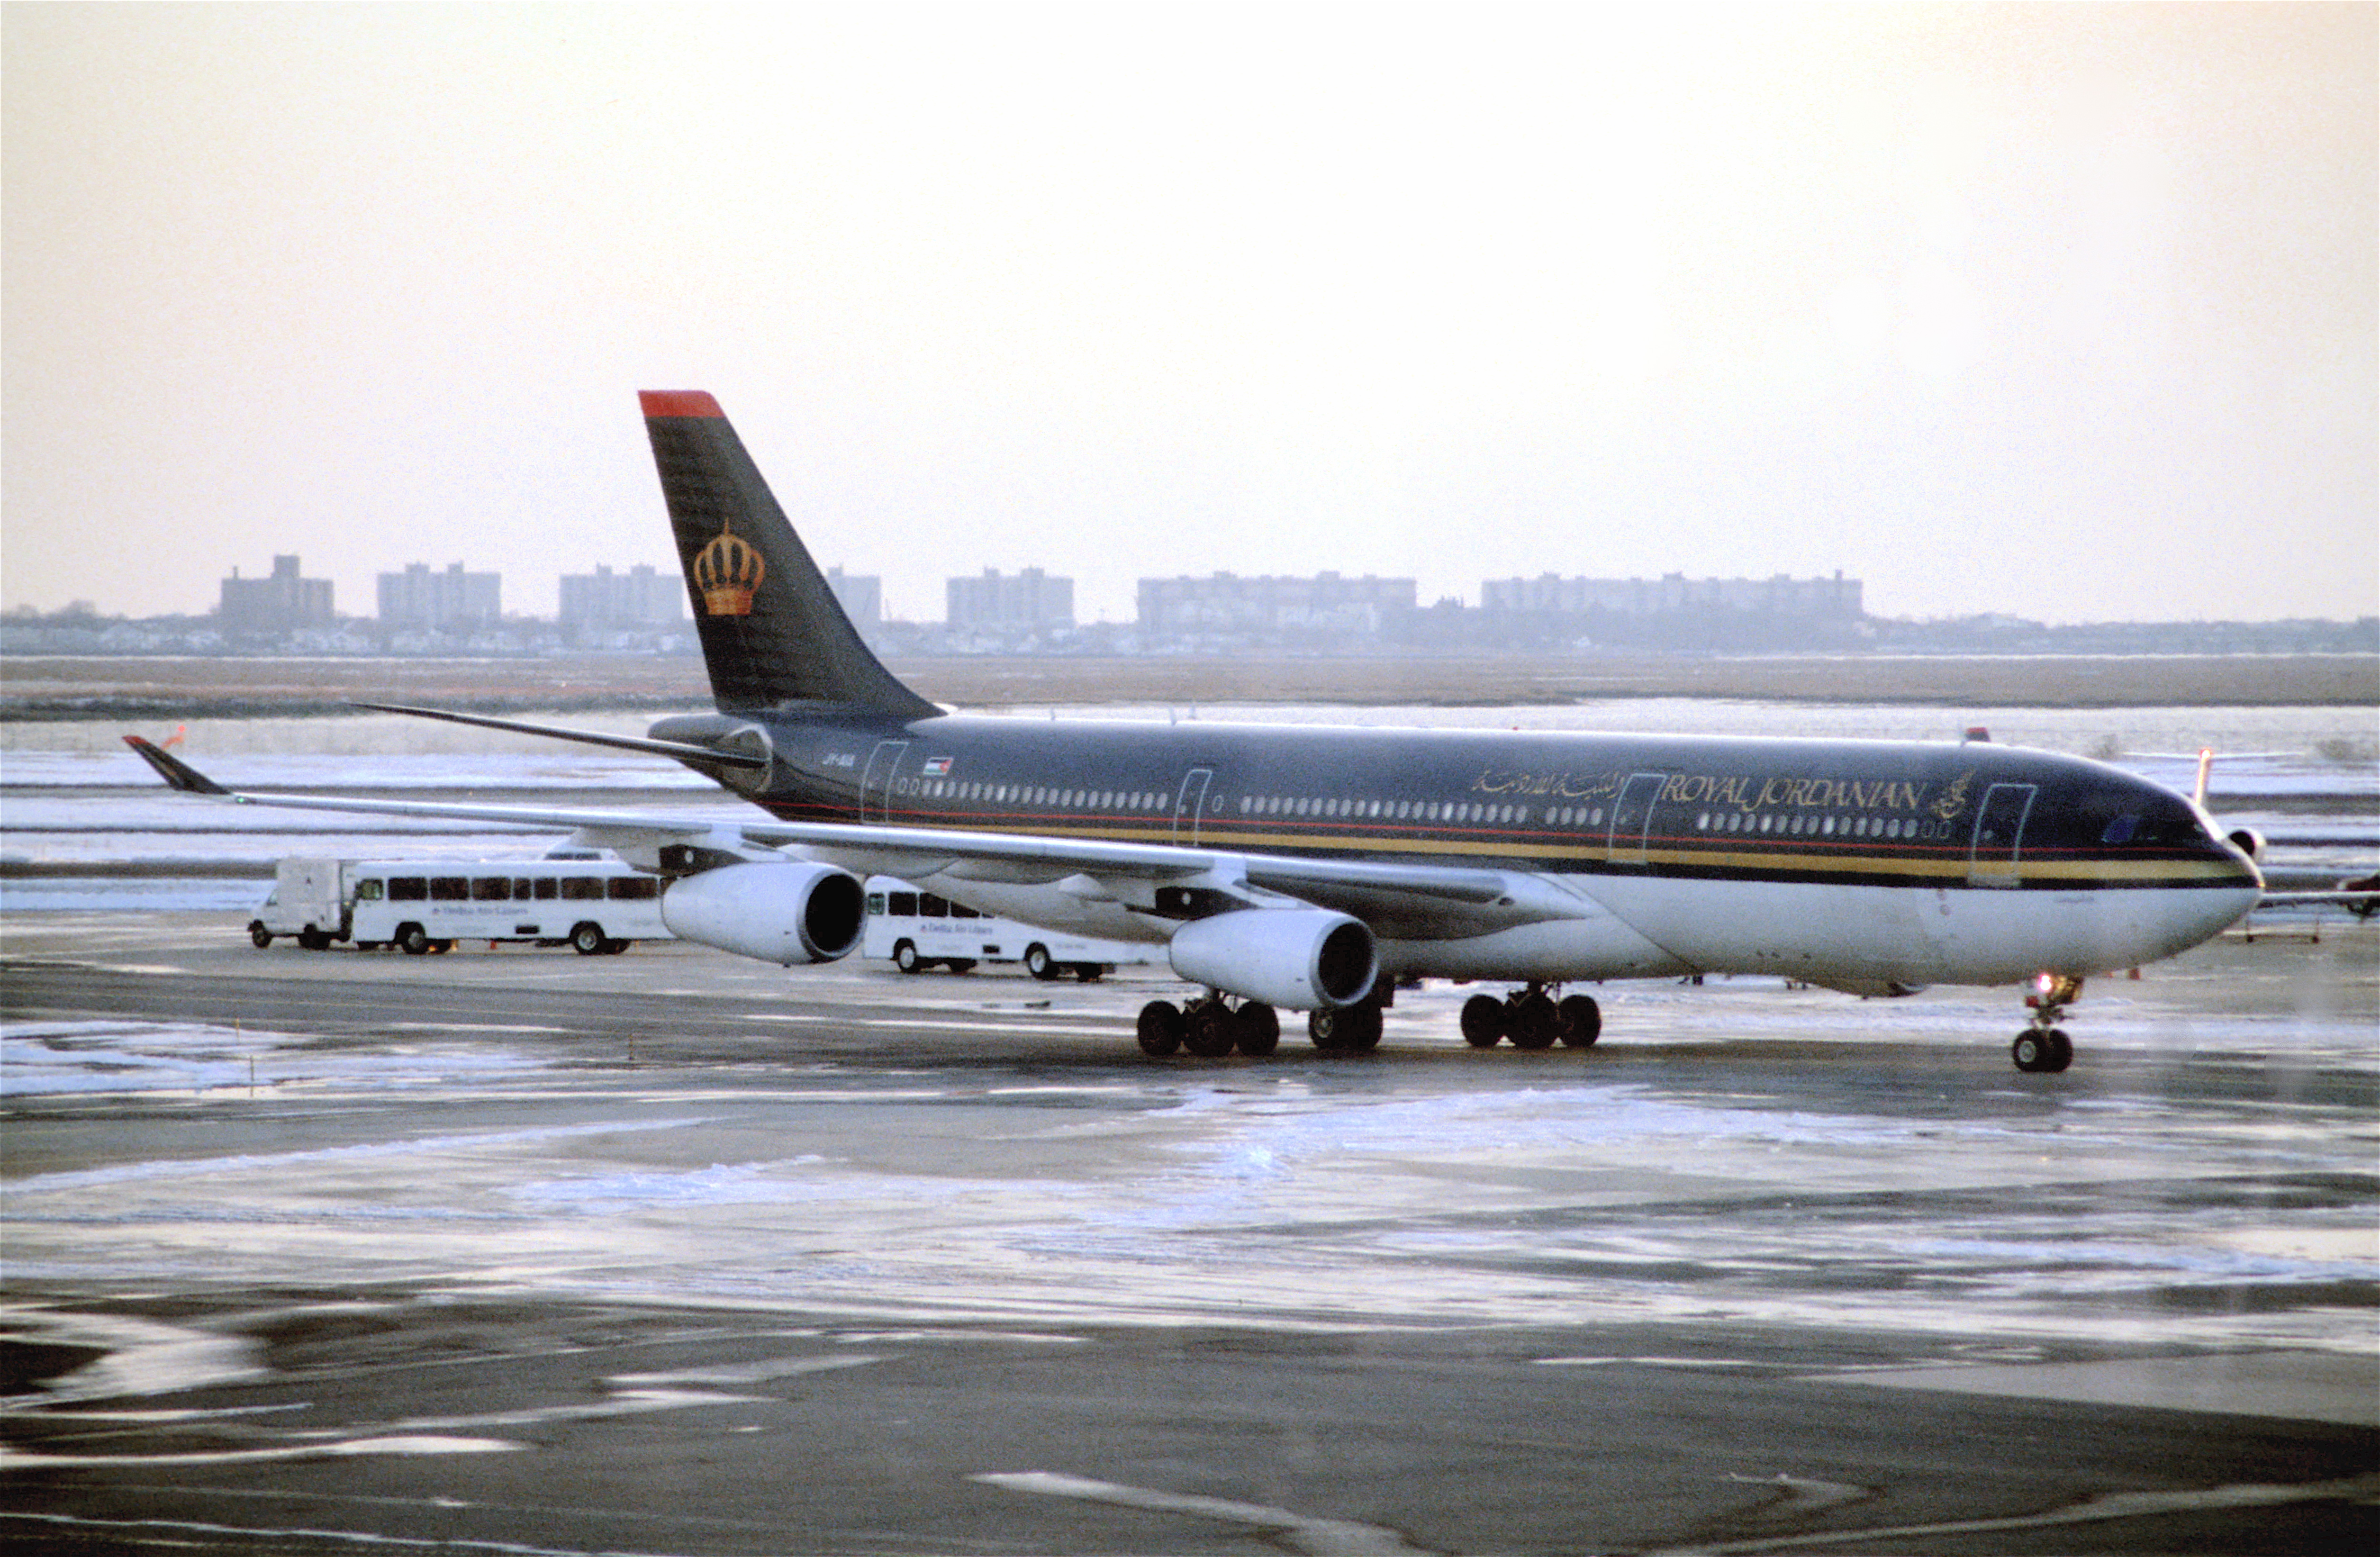 File:398aw - Royal Jordanian Airlines Airbus A340-212, JY-AIA@JFK 